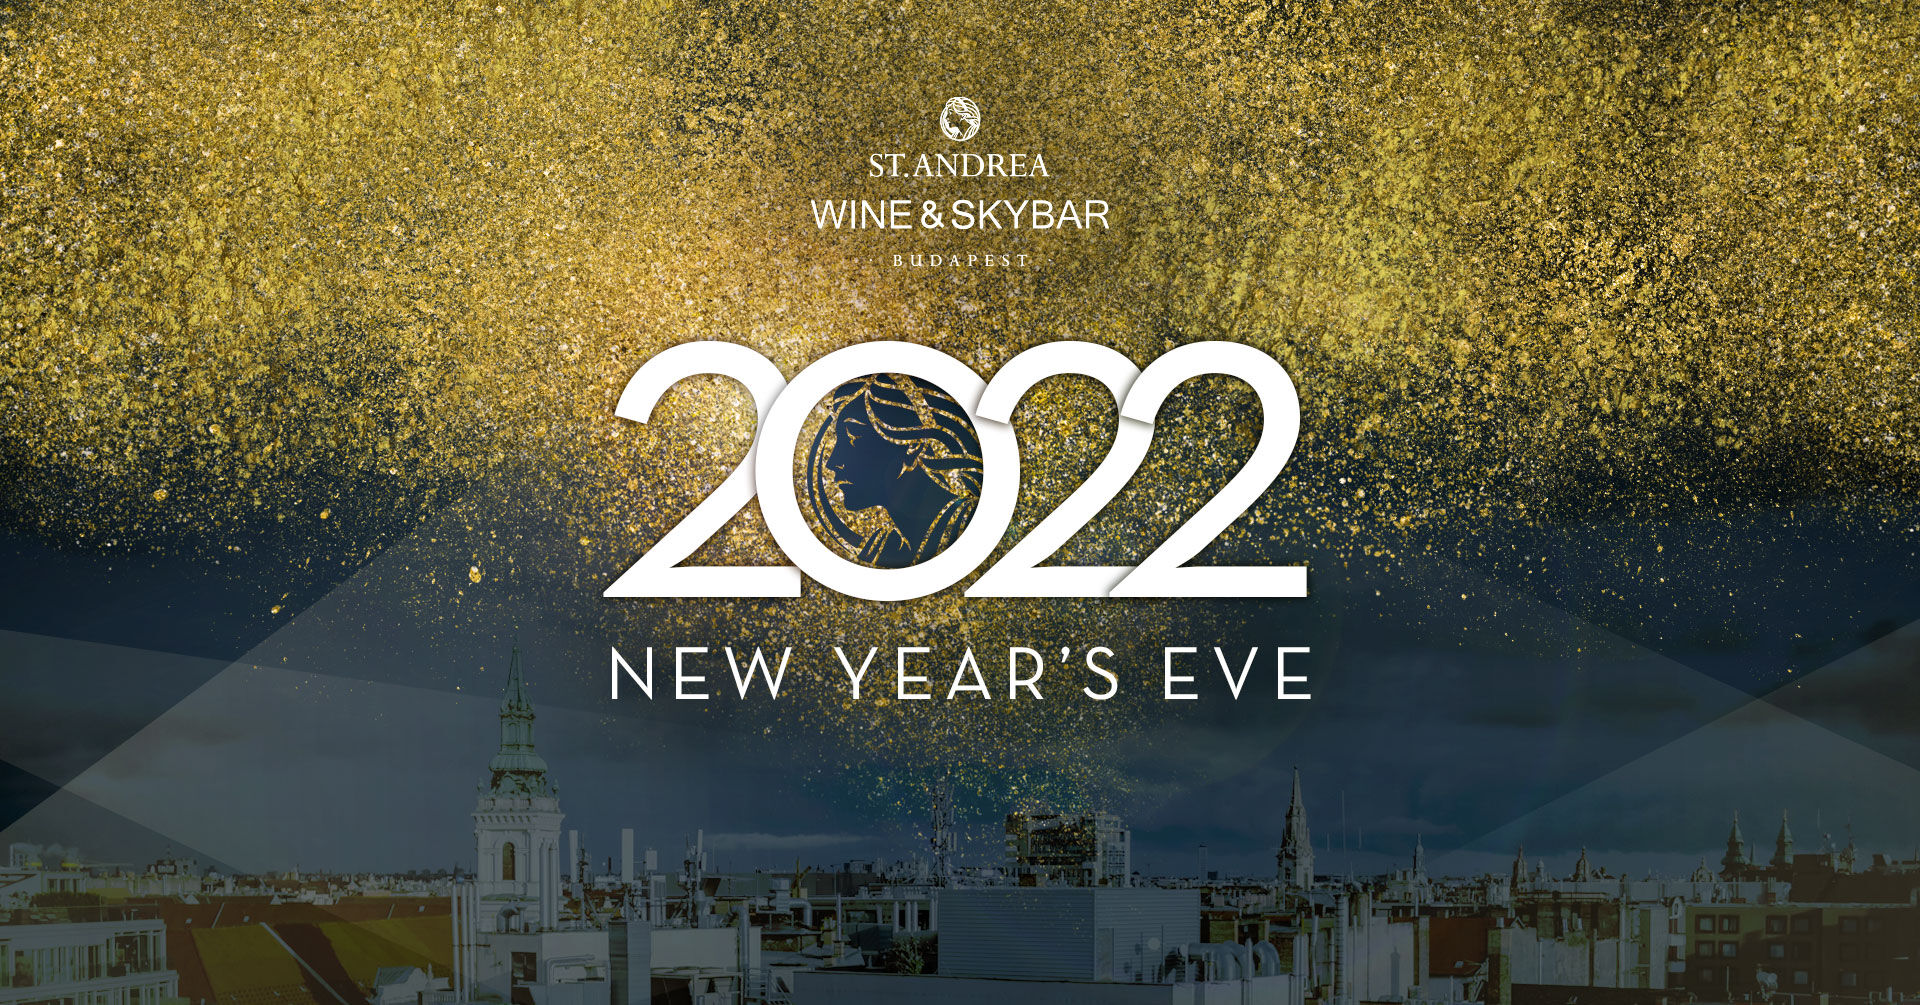 New Year's Eve / St. Andrea Wine & Skybar